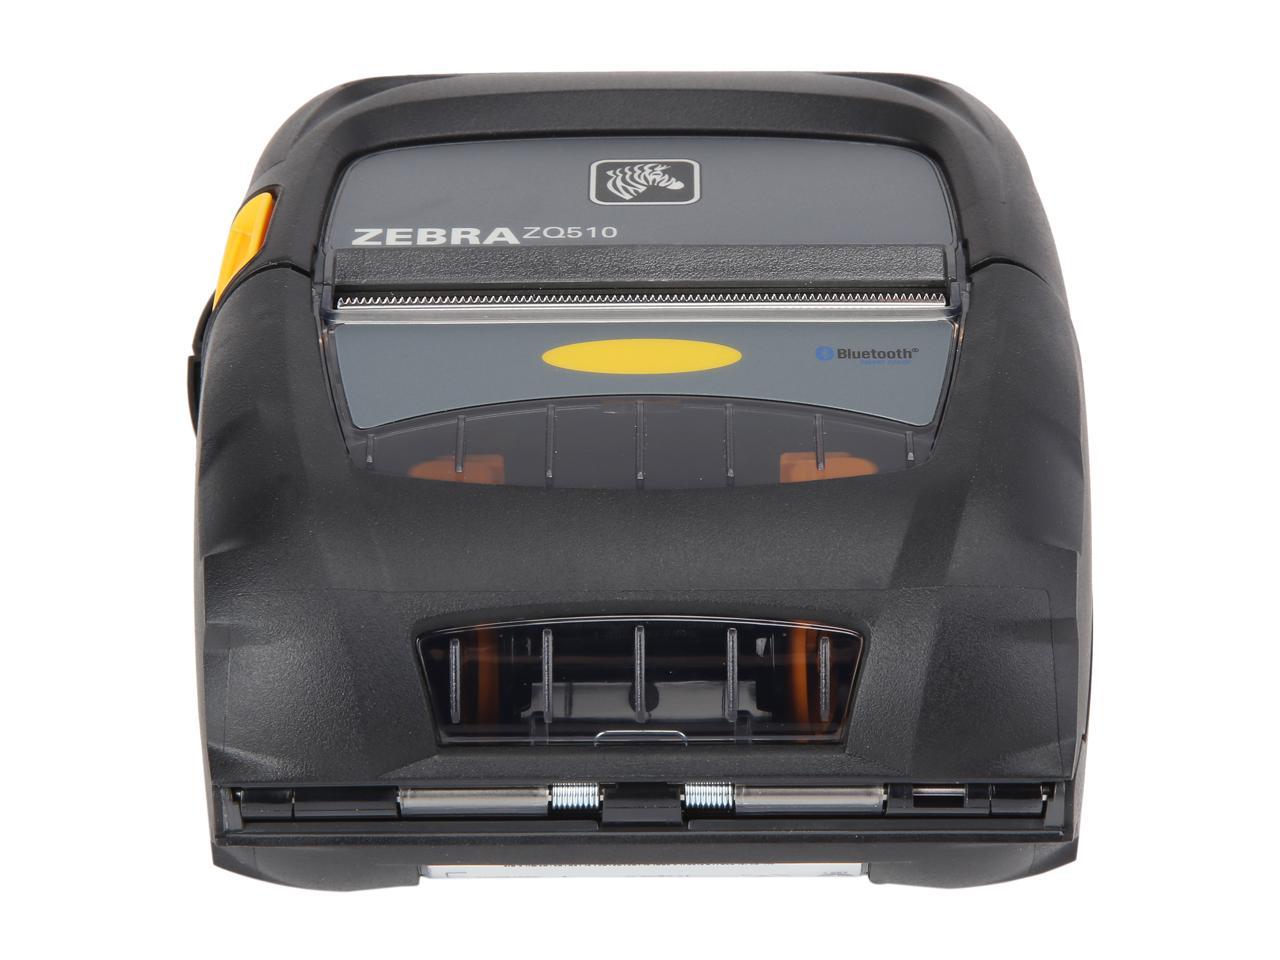 Zebra Zq510 3 Mobile Direct Thermal Receipt And Label Printer 203 Dpi Bluetooth 40 Linered 2184